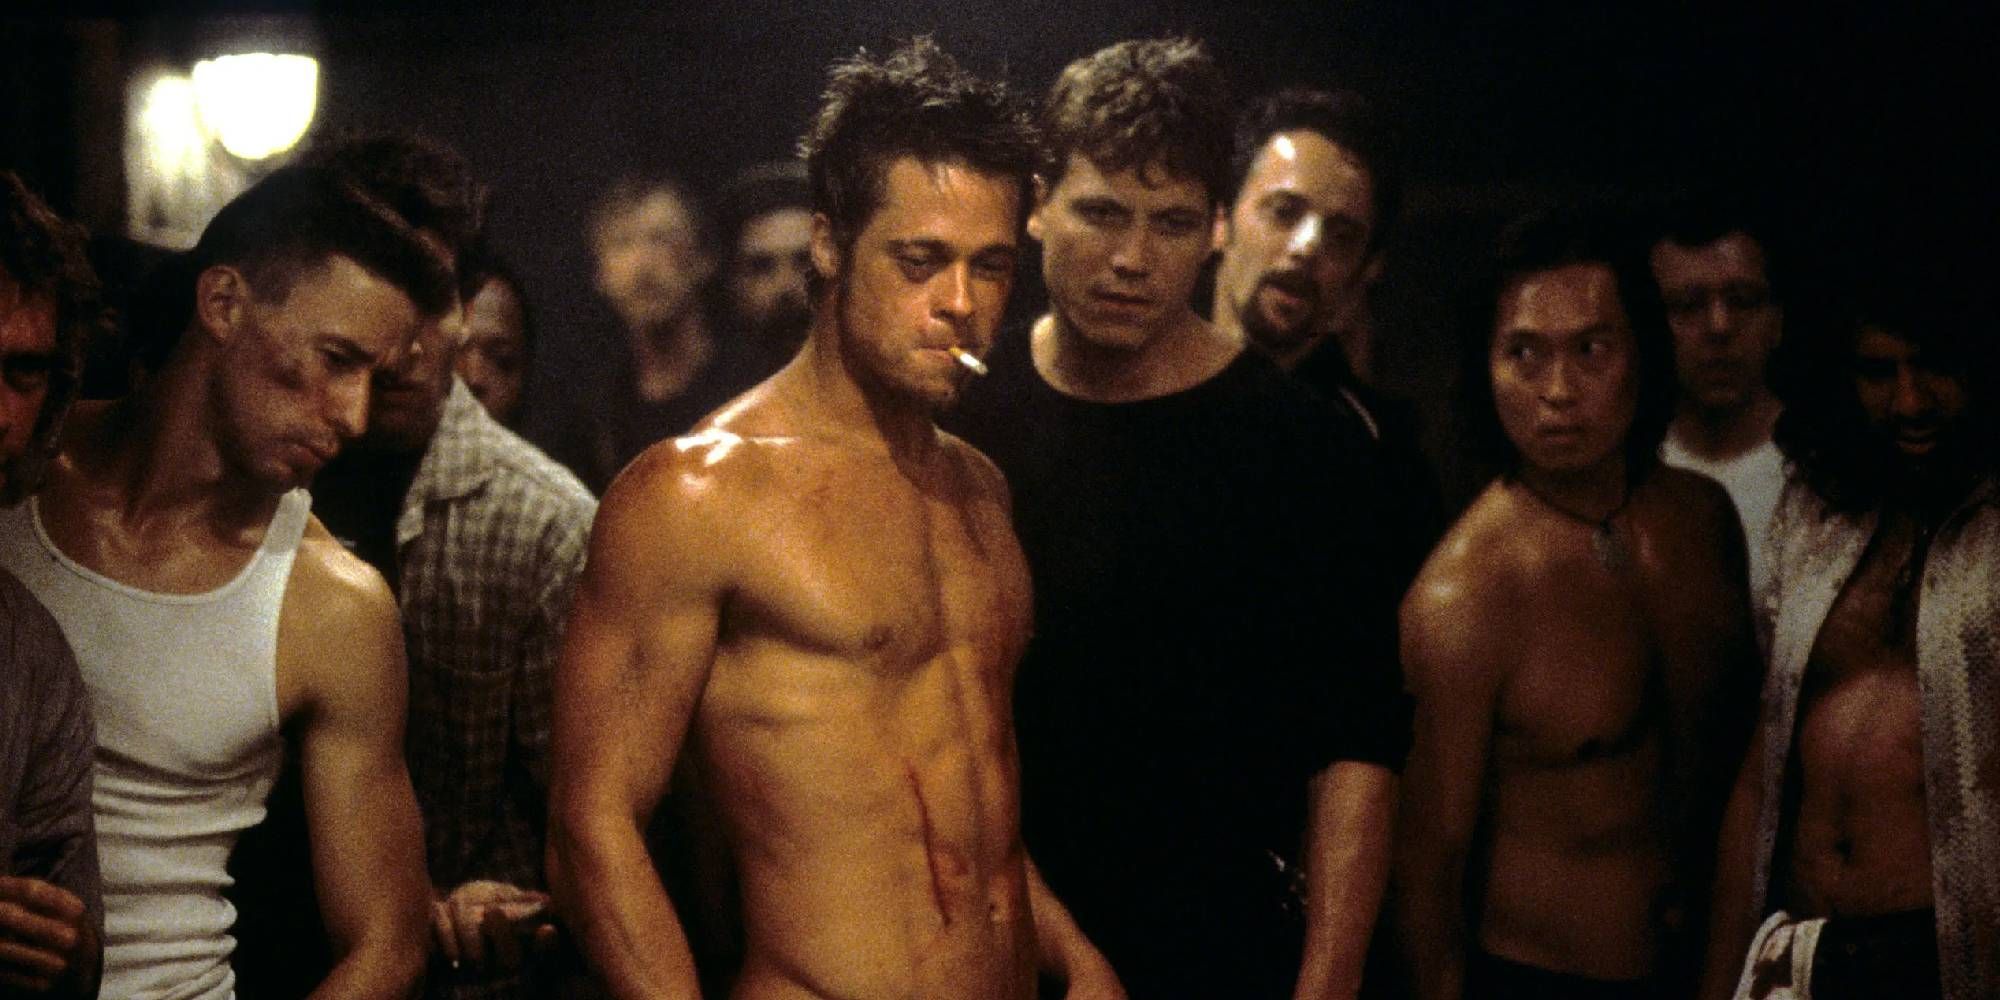 A shirtless Brad Pitt surrounded by men in Fight Club